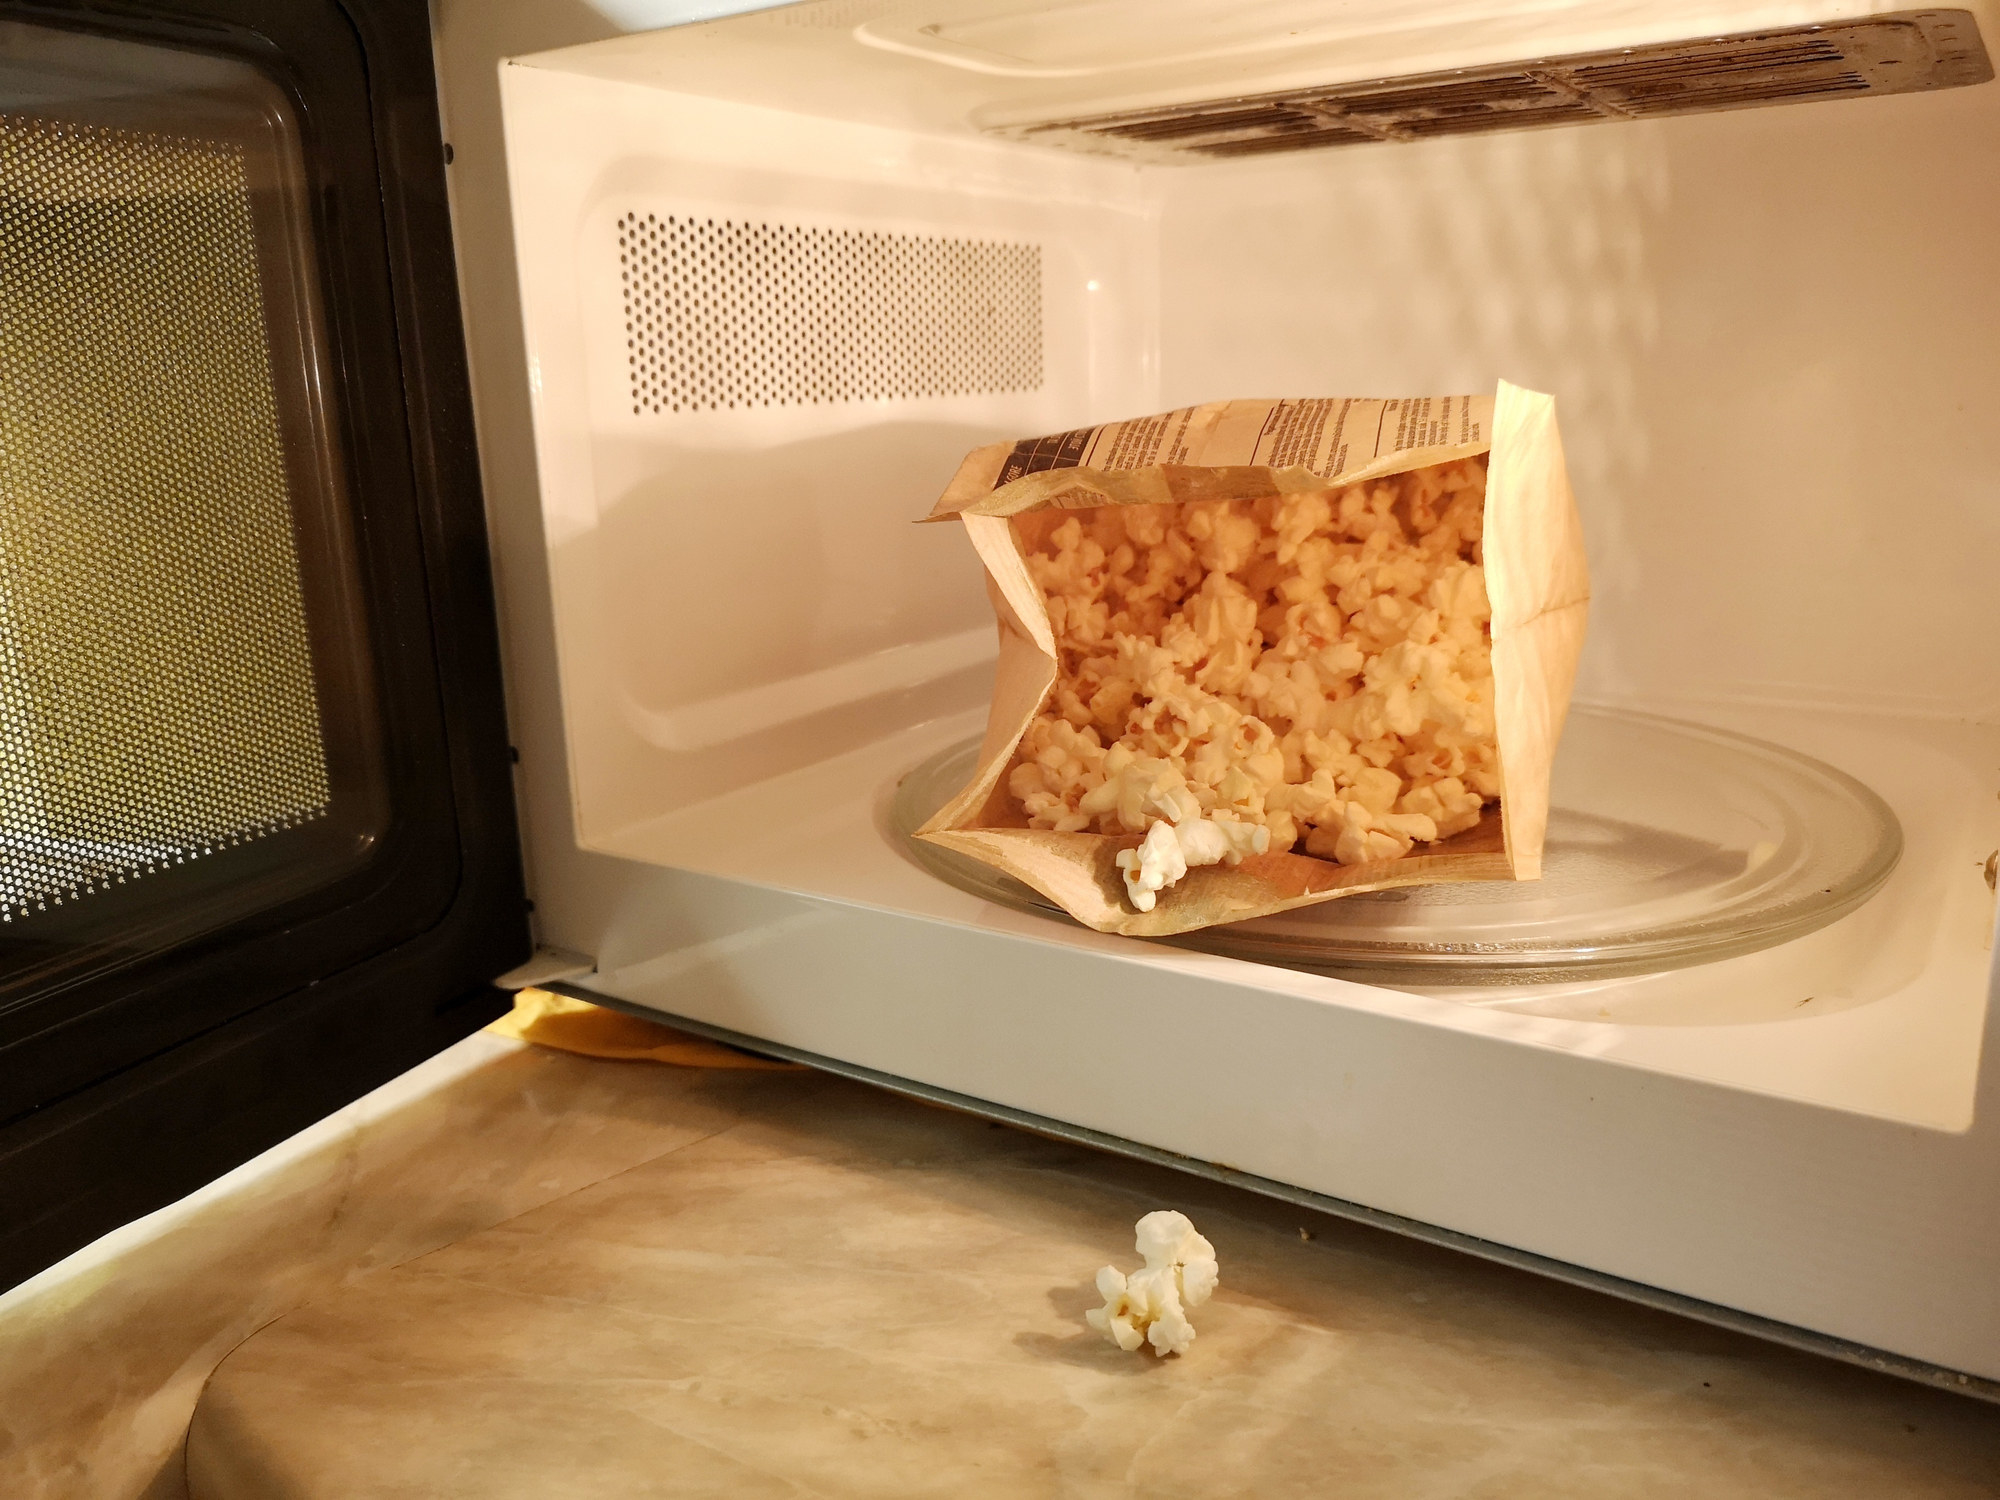 A bag of freshly popped popcorn in a microwave